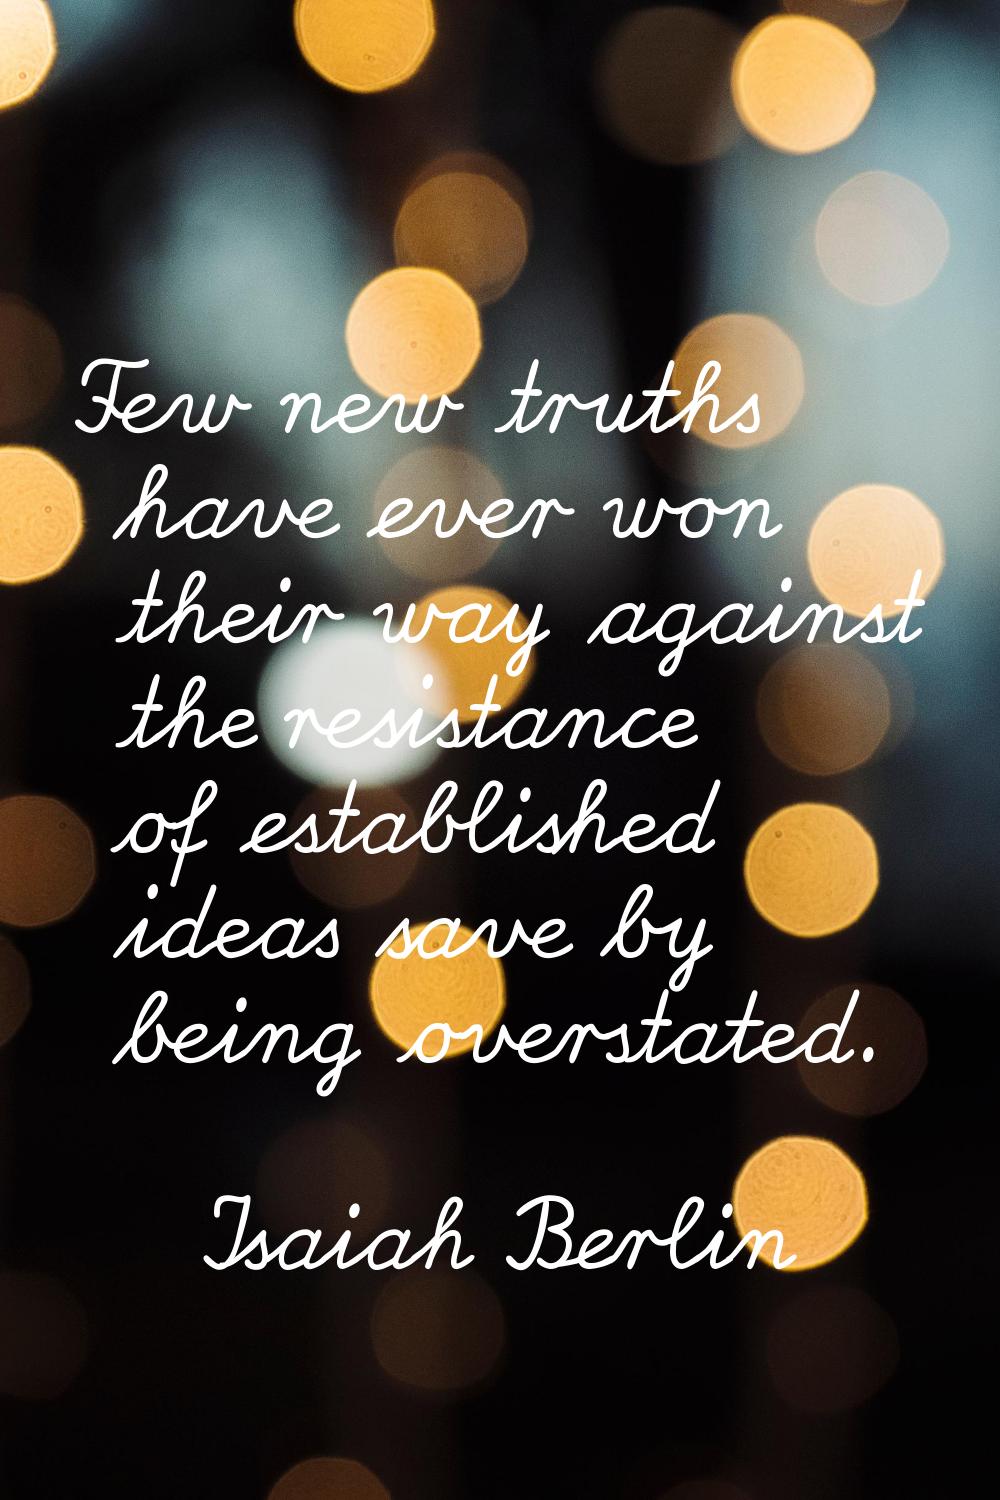 Few new truths have ever won their way against the resistance of established ideas save by being ov